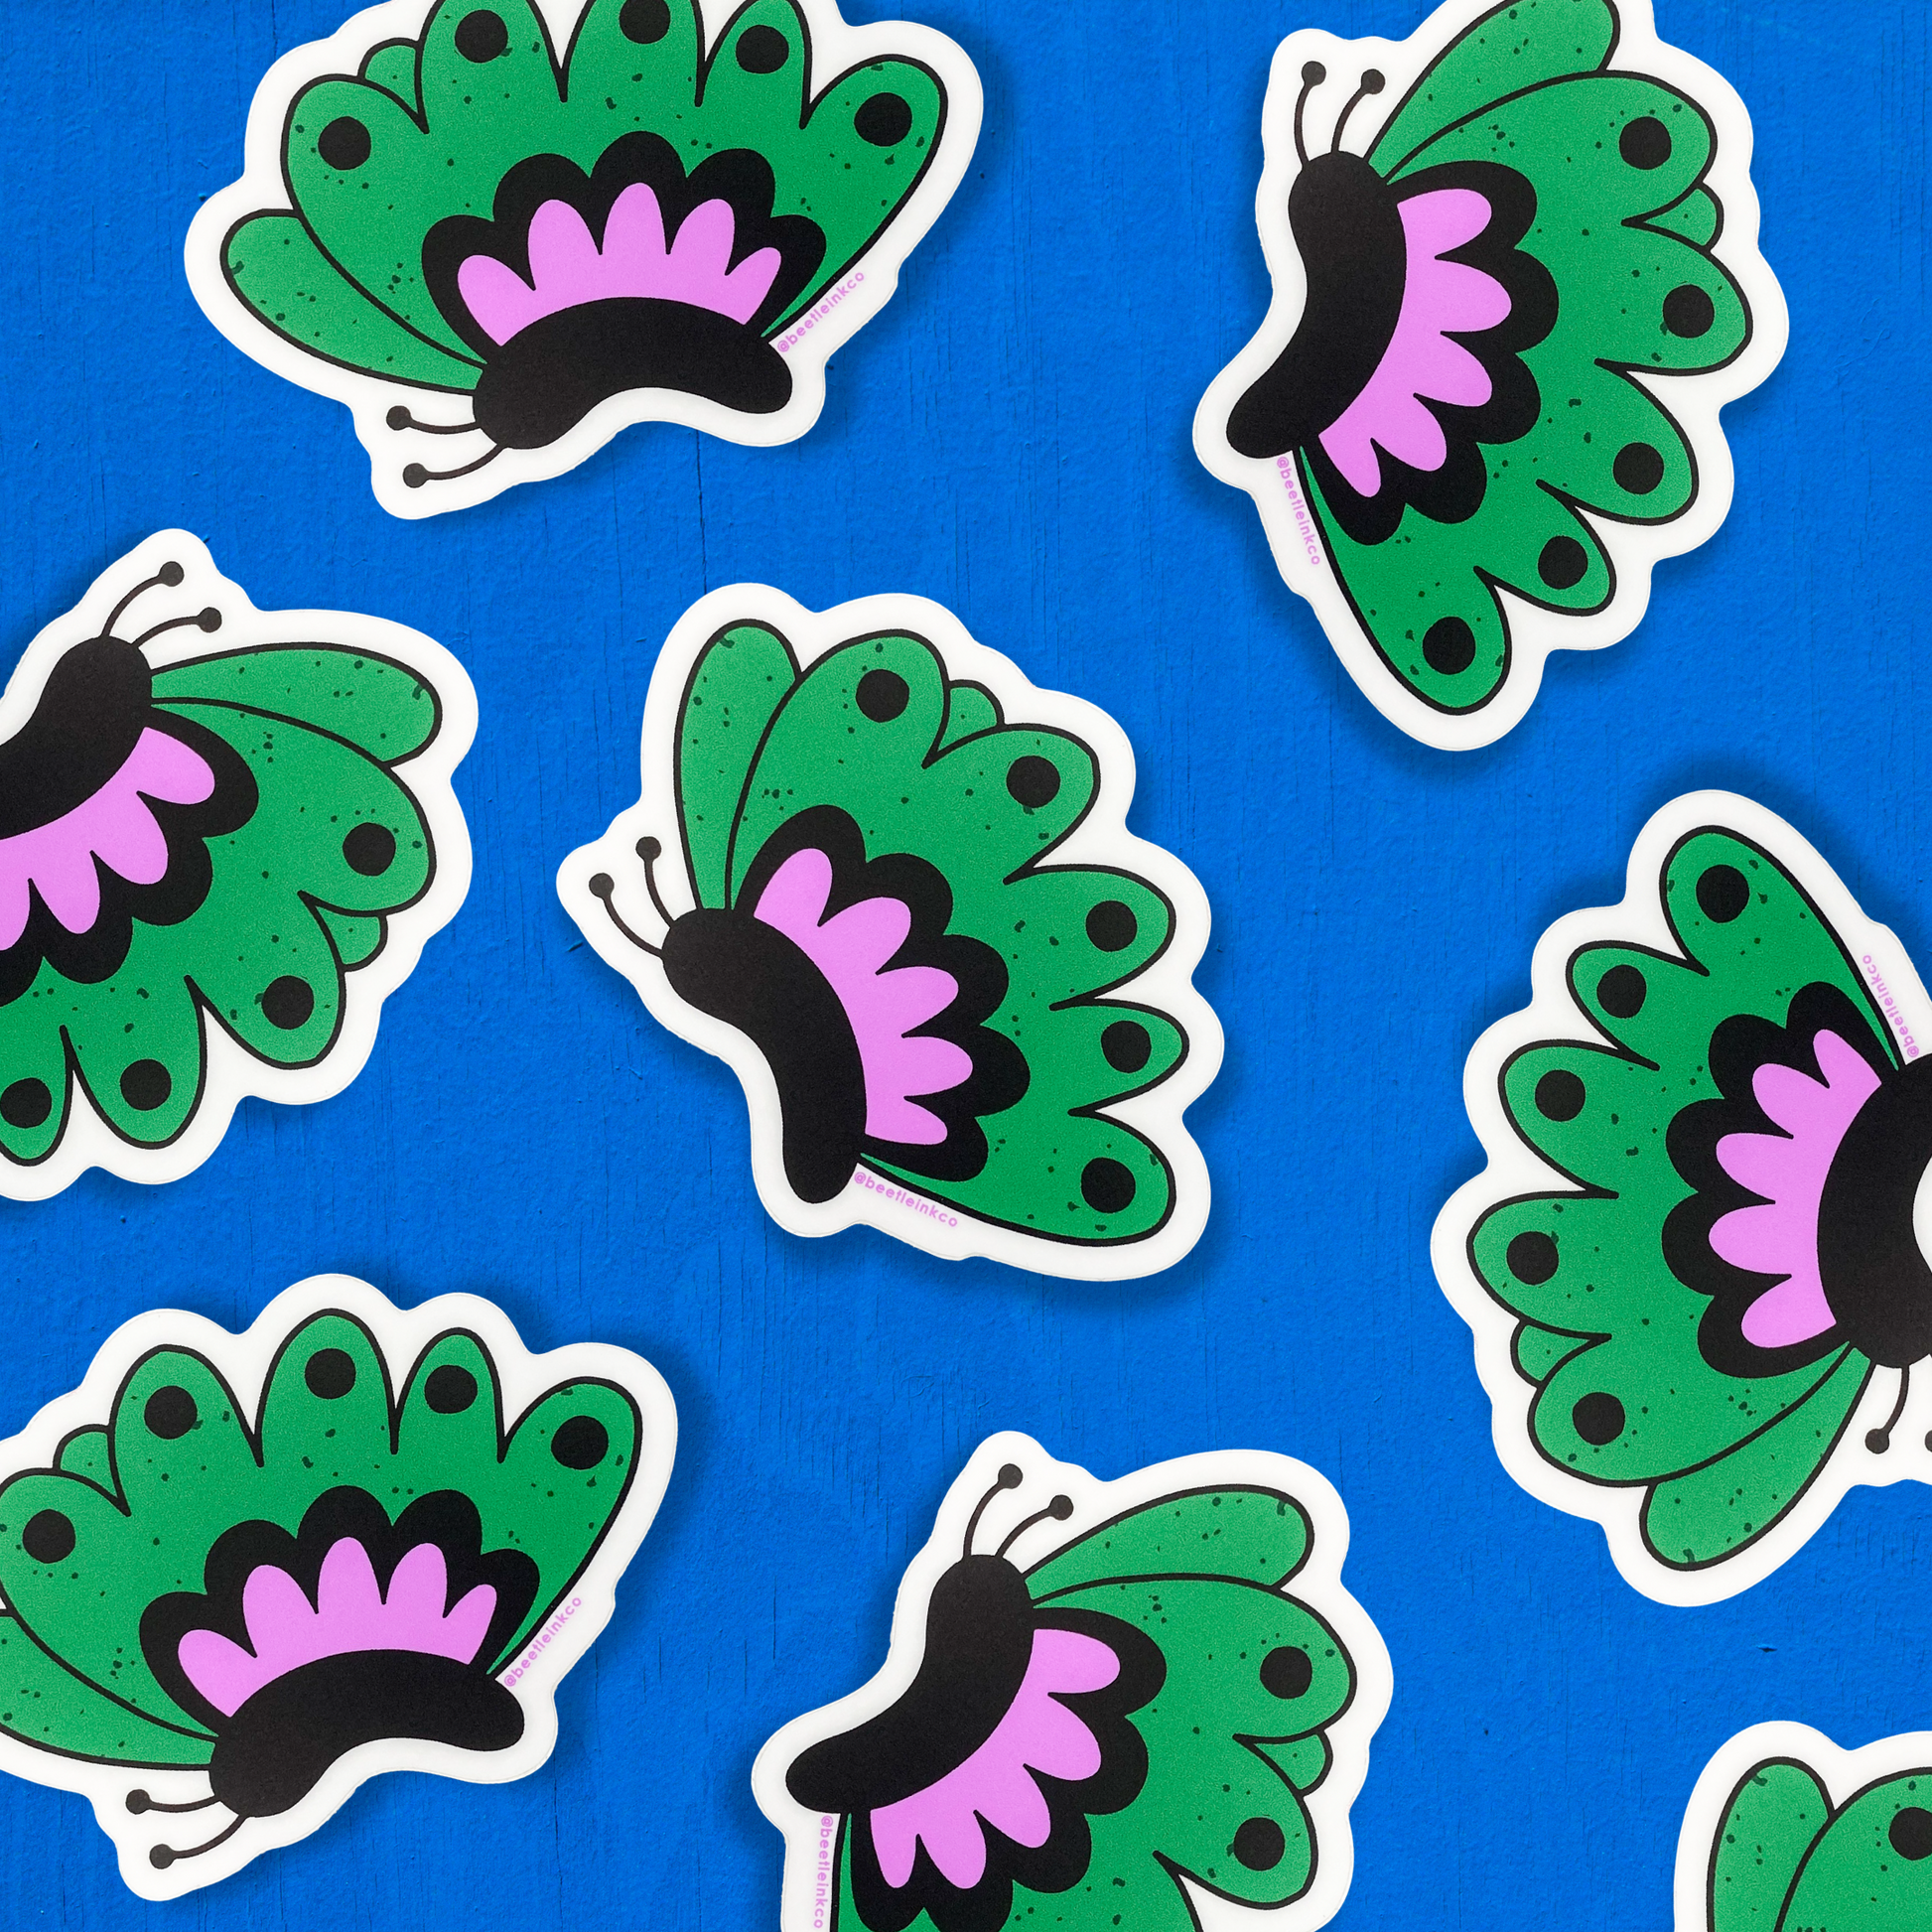 Hand drawn vinyl stickers in the shape of green fluttering butterflies, cover a cobalt blue table.